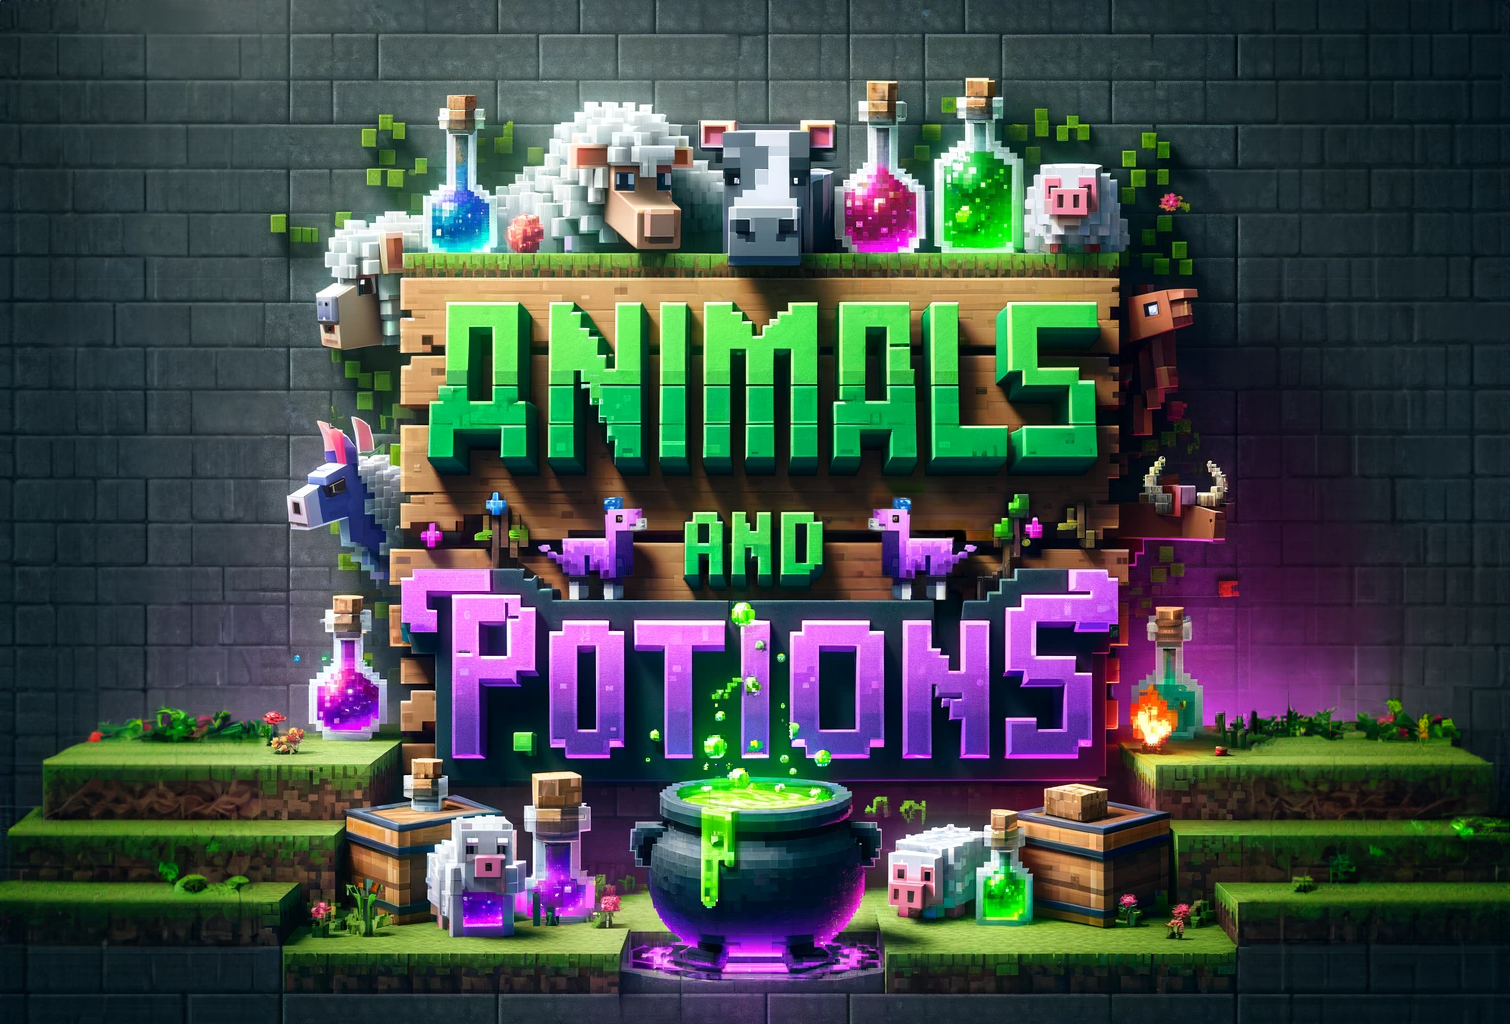 Animals and Potions Banner